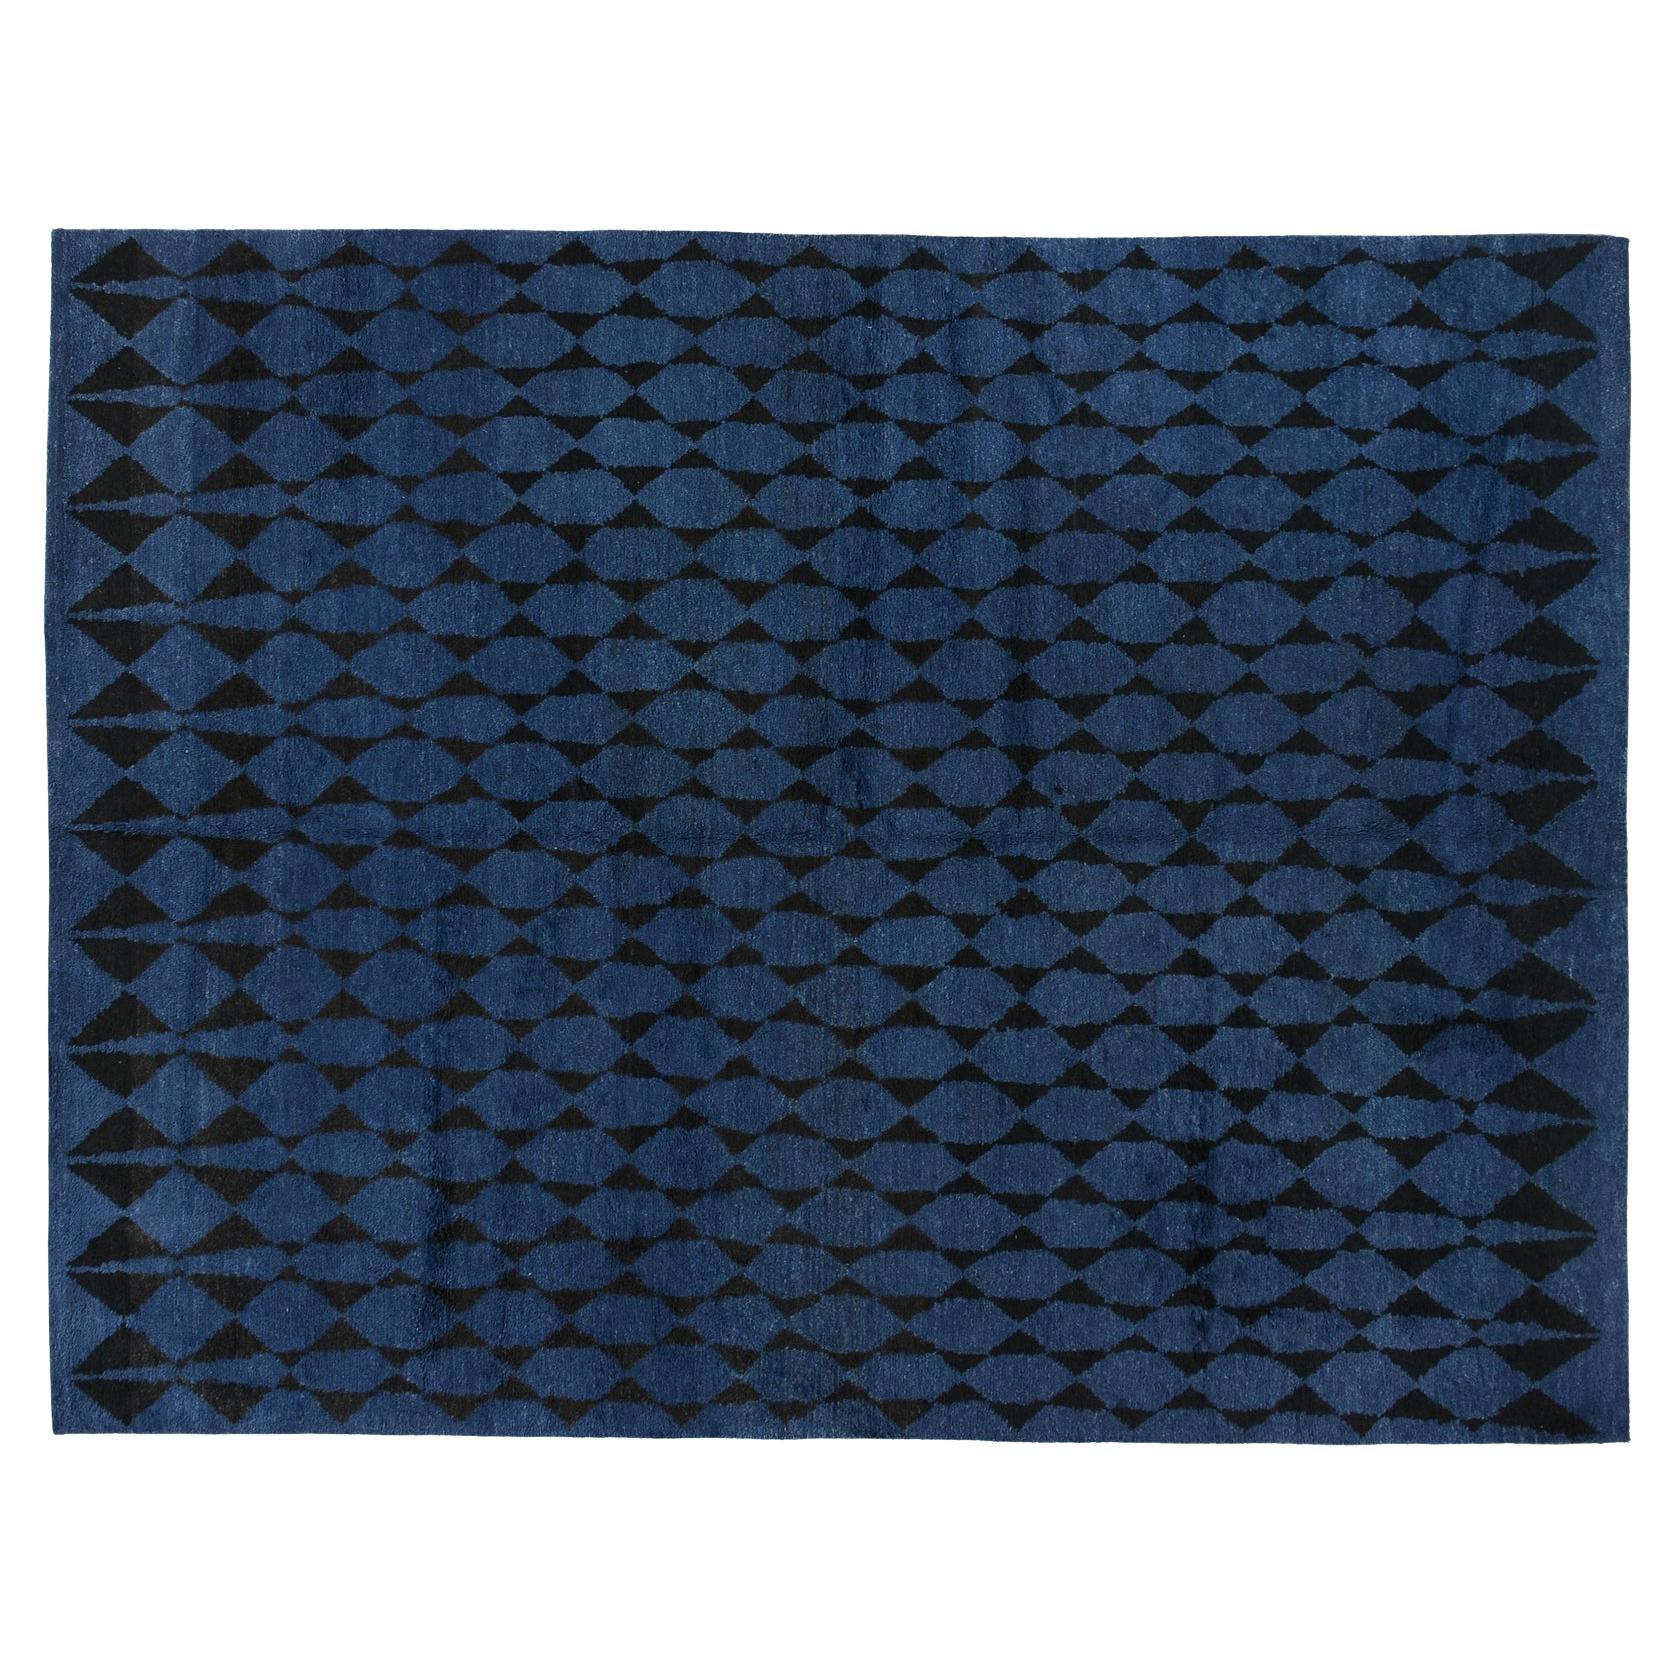 9'x12' Modern Moroccan Rug in Navy Blue For Sale